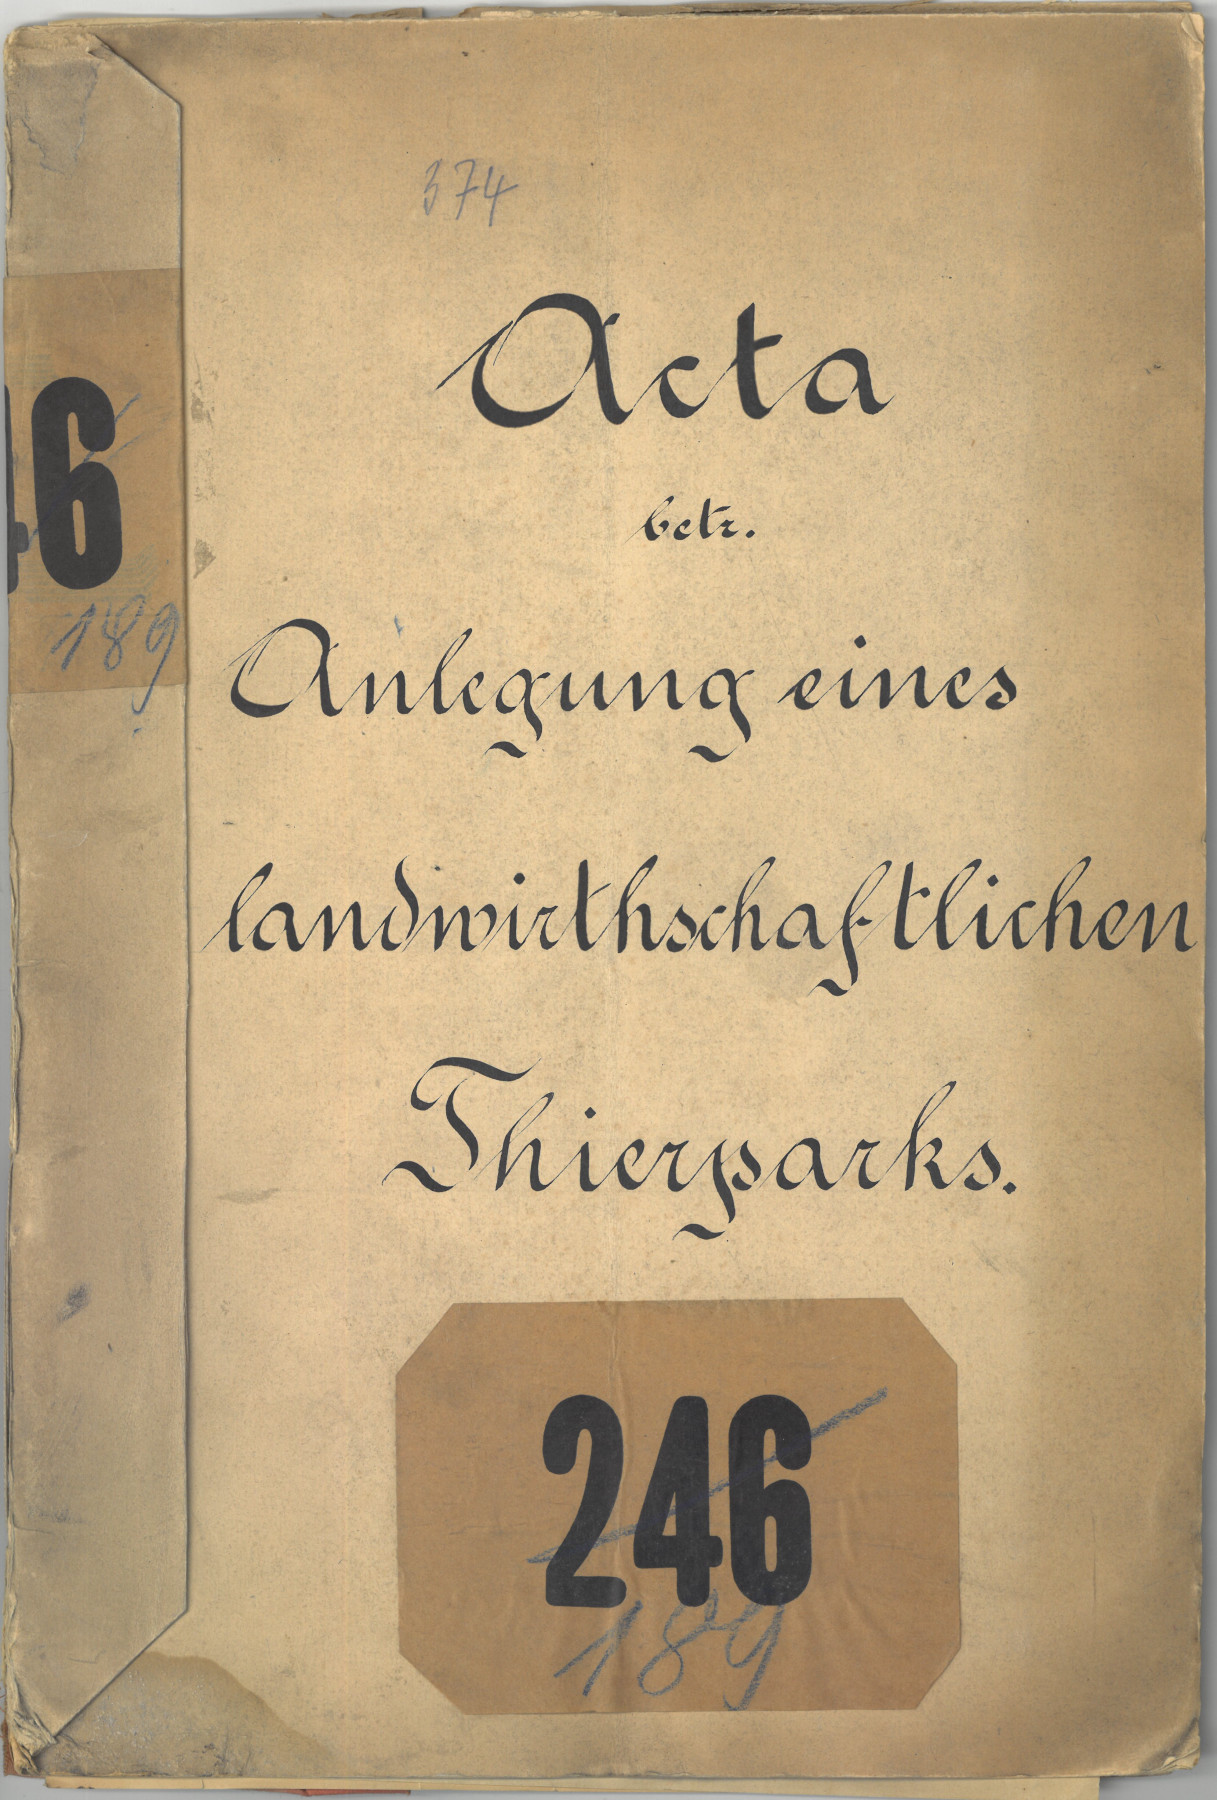 File page with handwritten title: Acta betr. Anlegung eines landwirthschaftlichen Thierparks. Below that, the number 246 is crossed out and 189 is written next to it in blue letters.